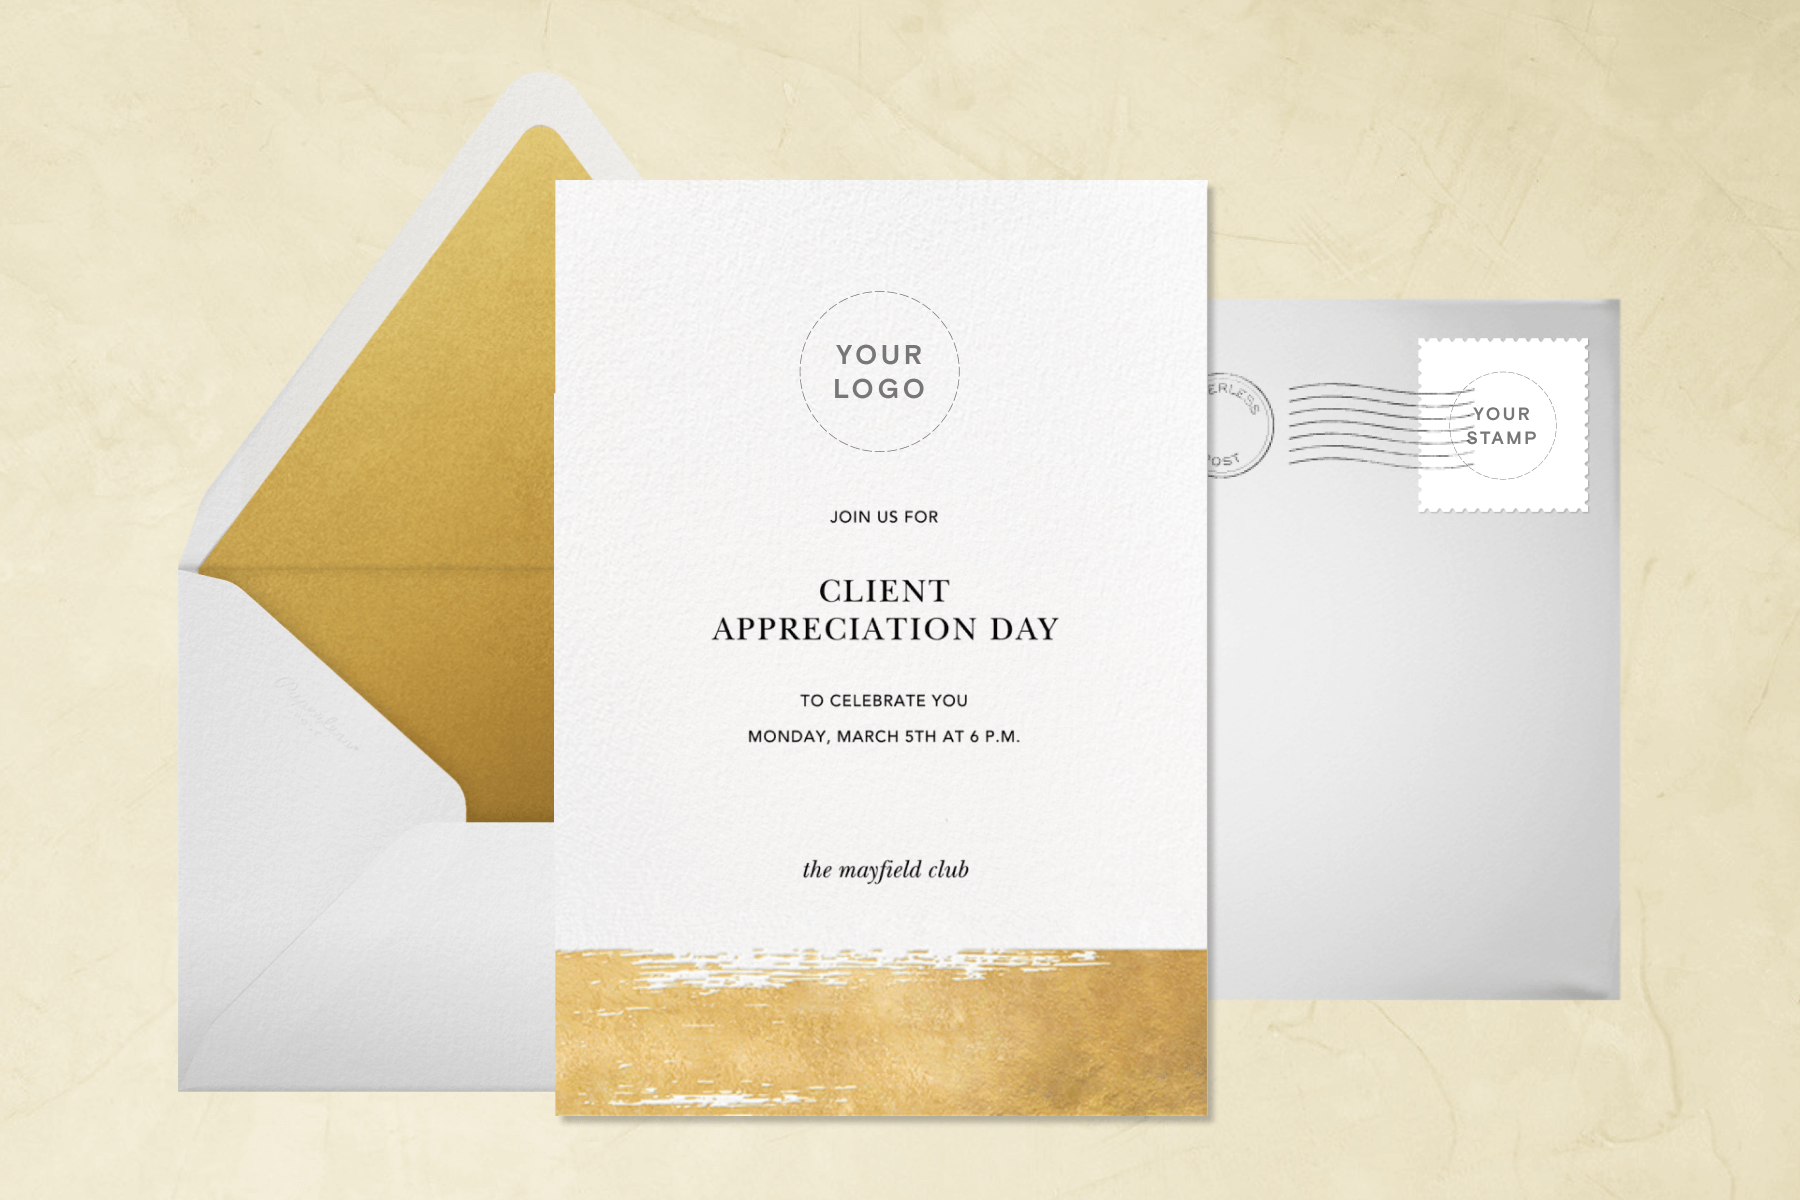 A Client Appreciation Day invitation with a gold brushstroke at the bottom and the option to add your own logo at the top, resting on a white envelope with gold lining and a white envelope with an option to upload your own stamp.